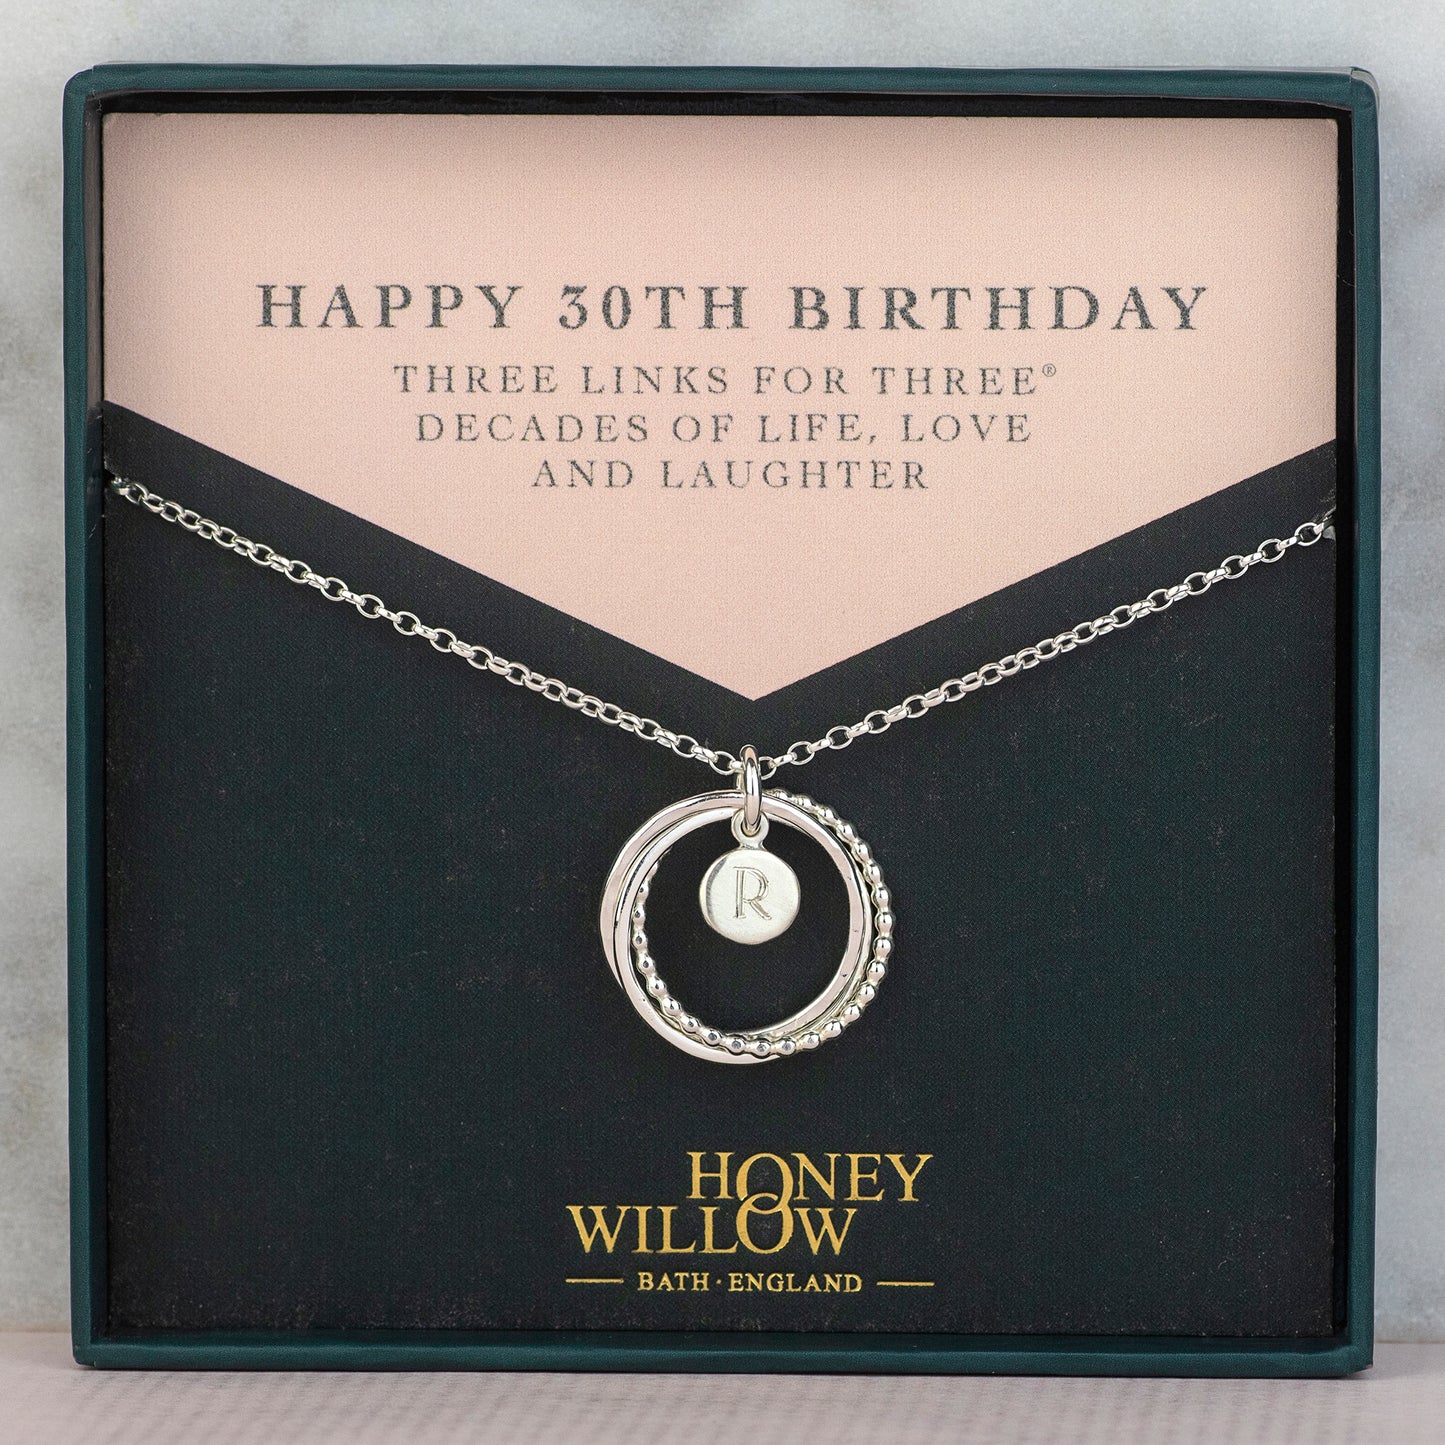 30th Birthday Initial Necklace - The Original 3 Links for 3 Decades Necklace - Silver